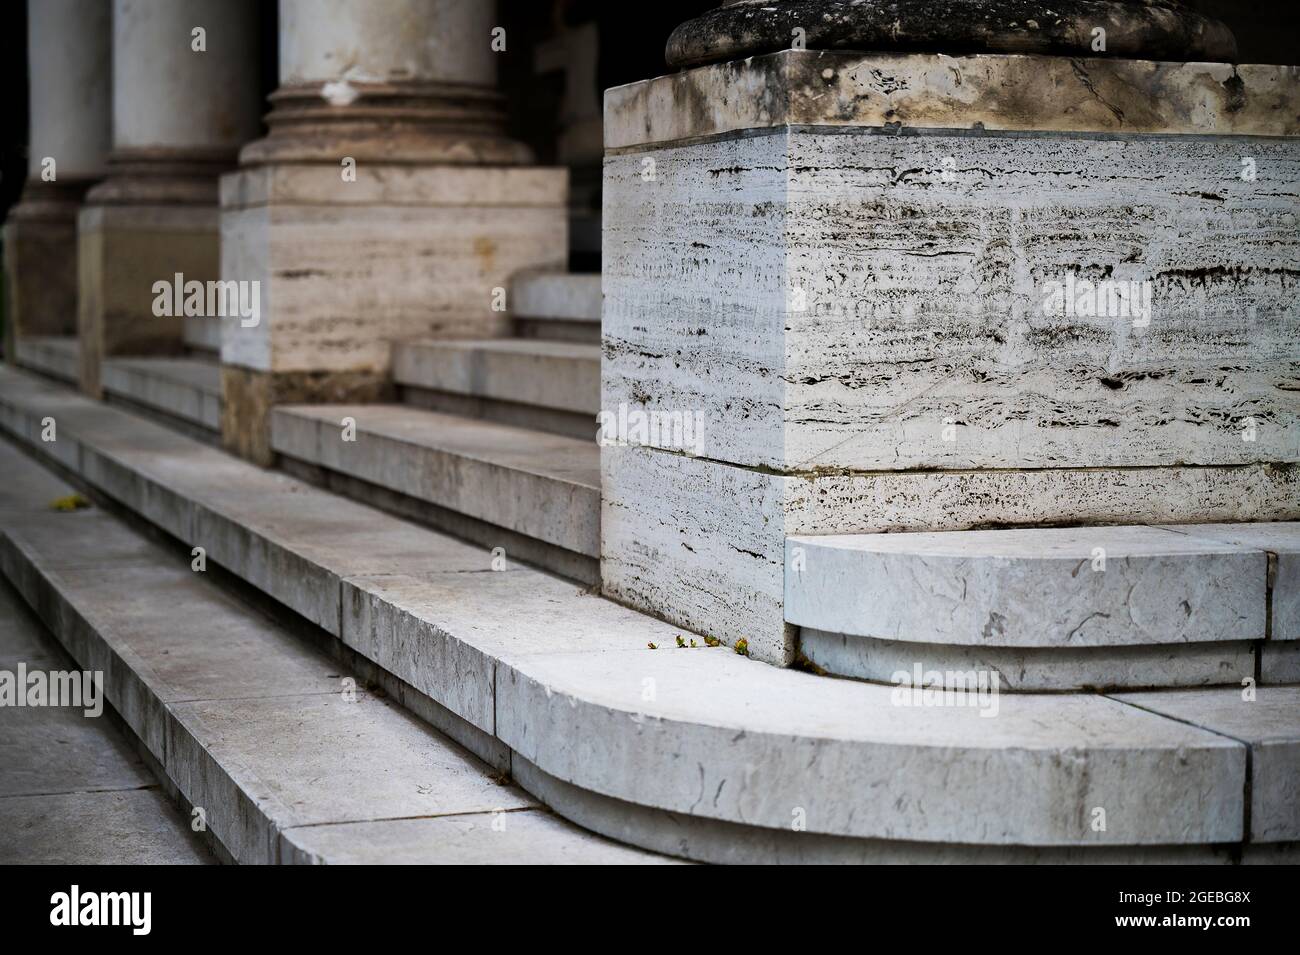 Marble steps of a grand building, Zagreb, Croatia Stock Photo